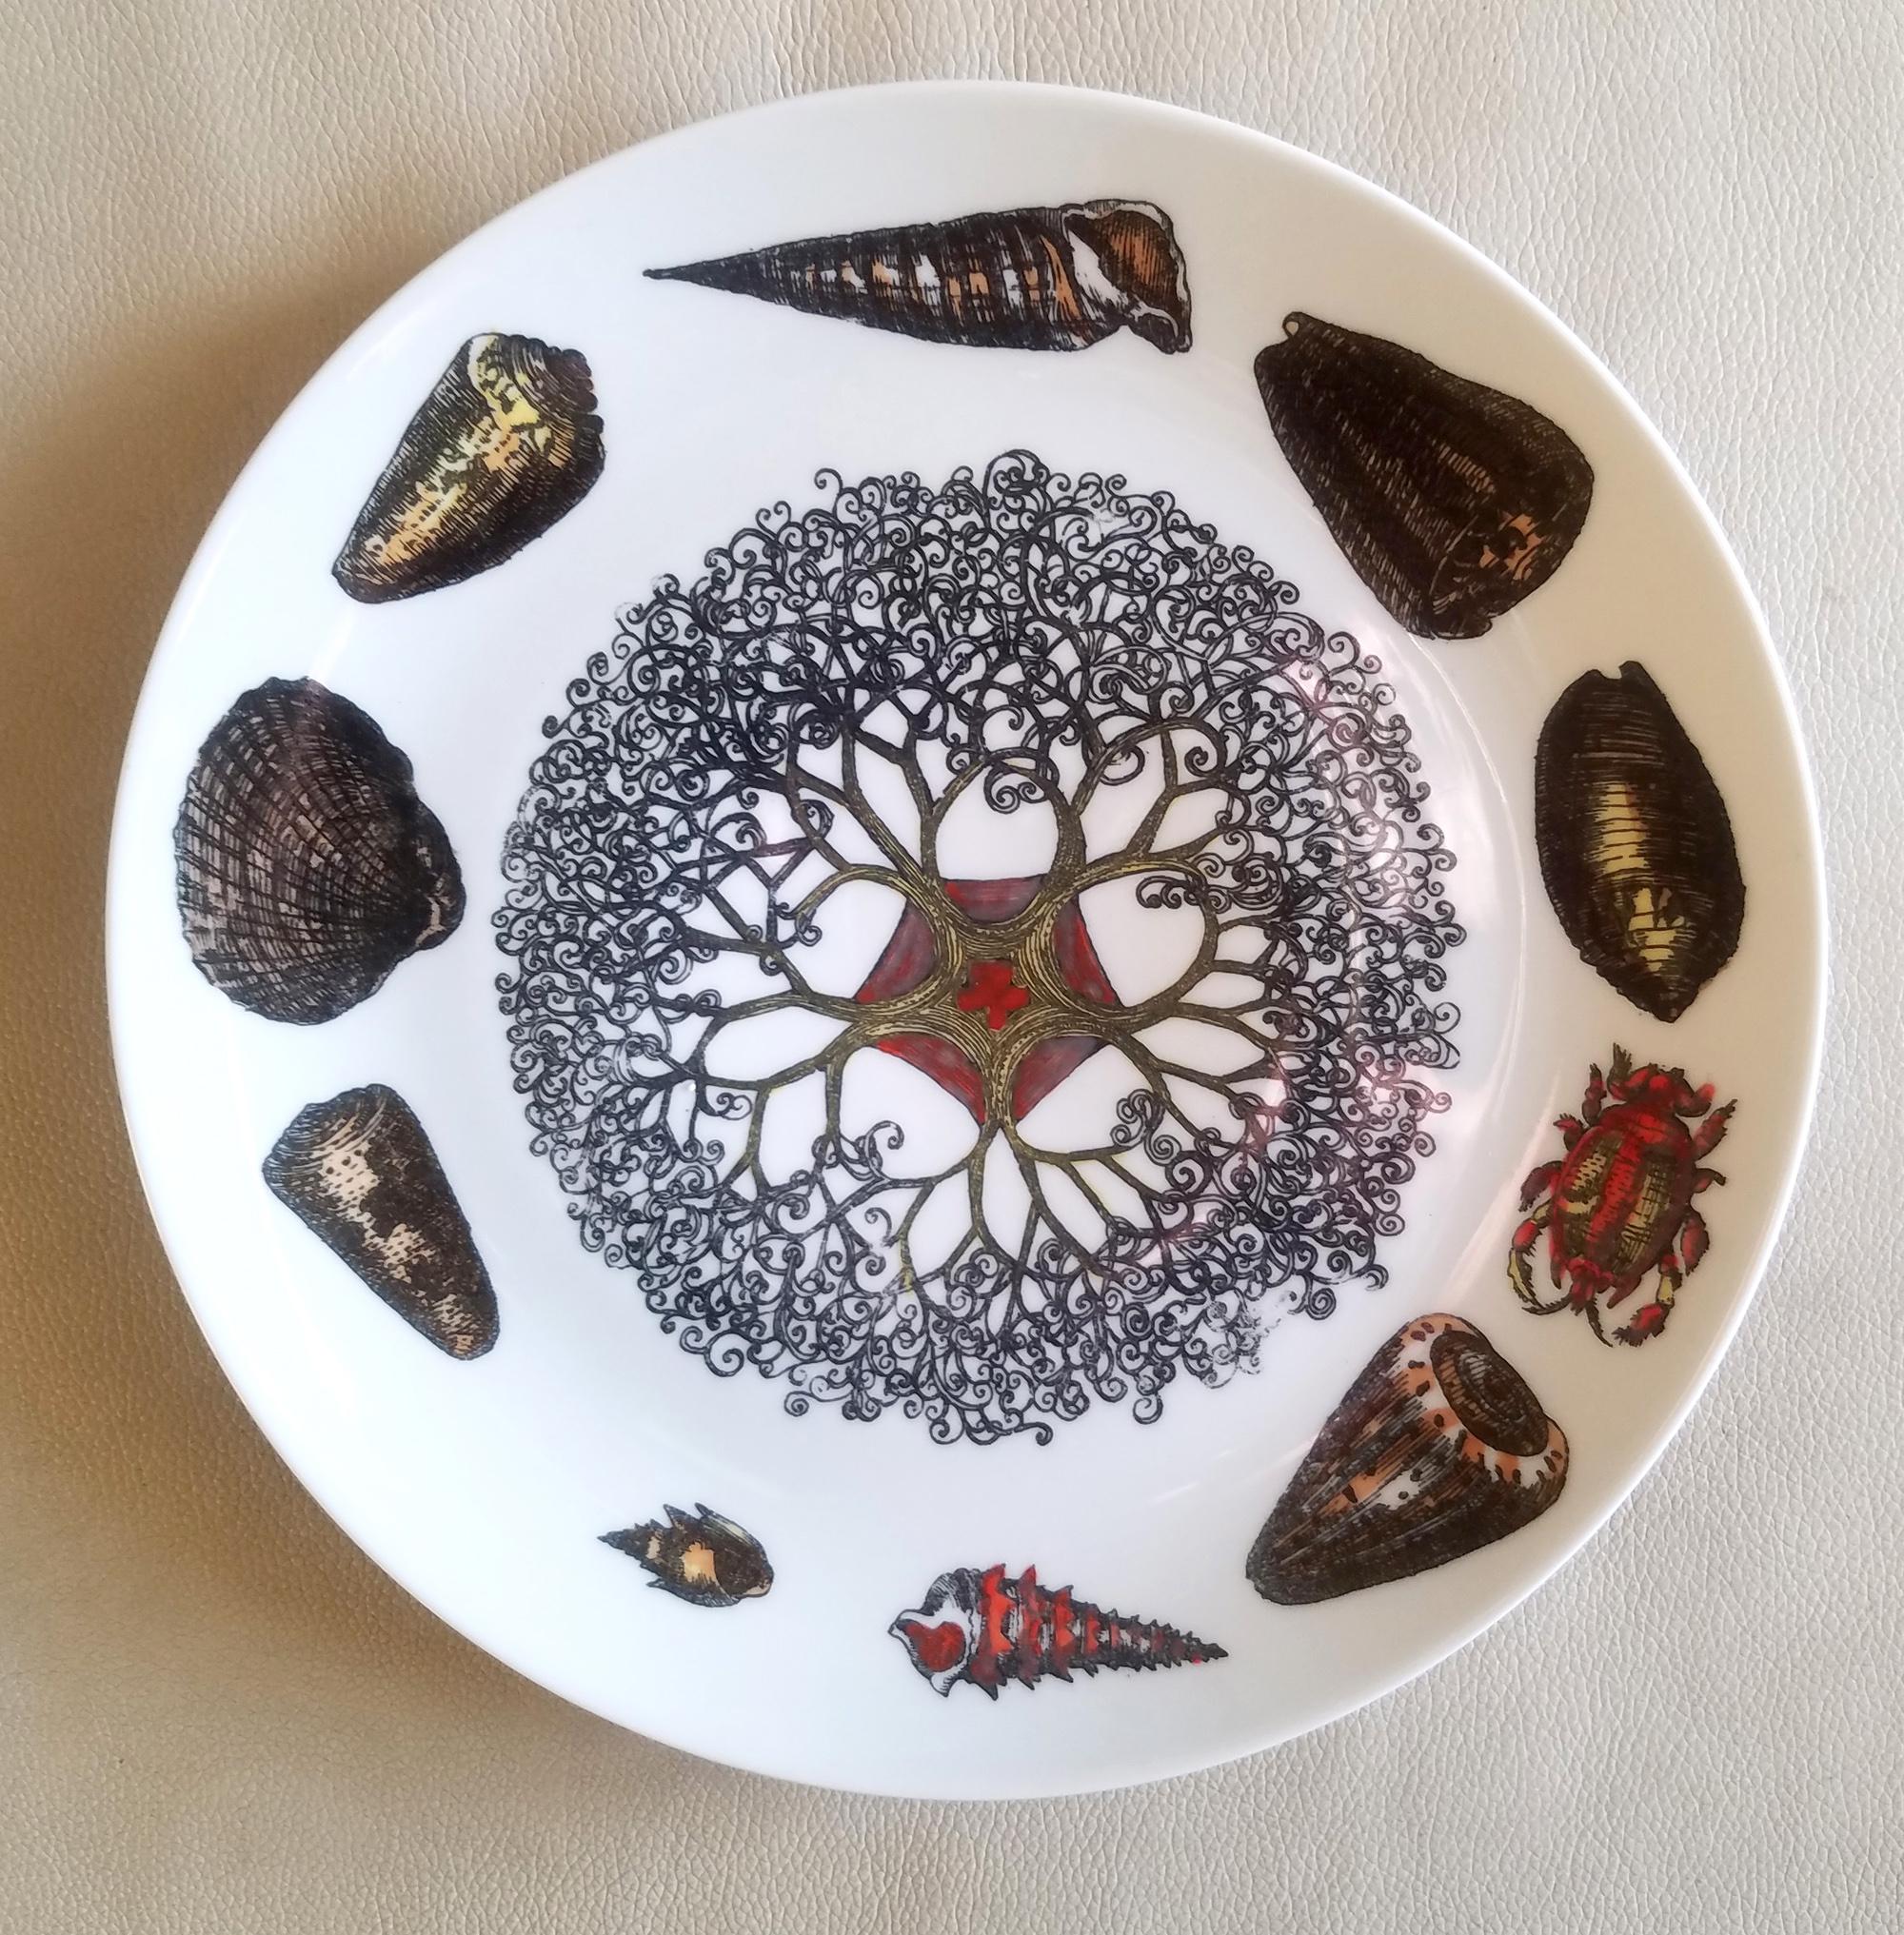 Piero Fornasetti Porcelain Conchiglie Seashell Set of Plates with Mollusks For Sale 10